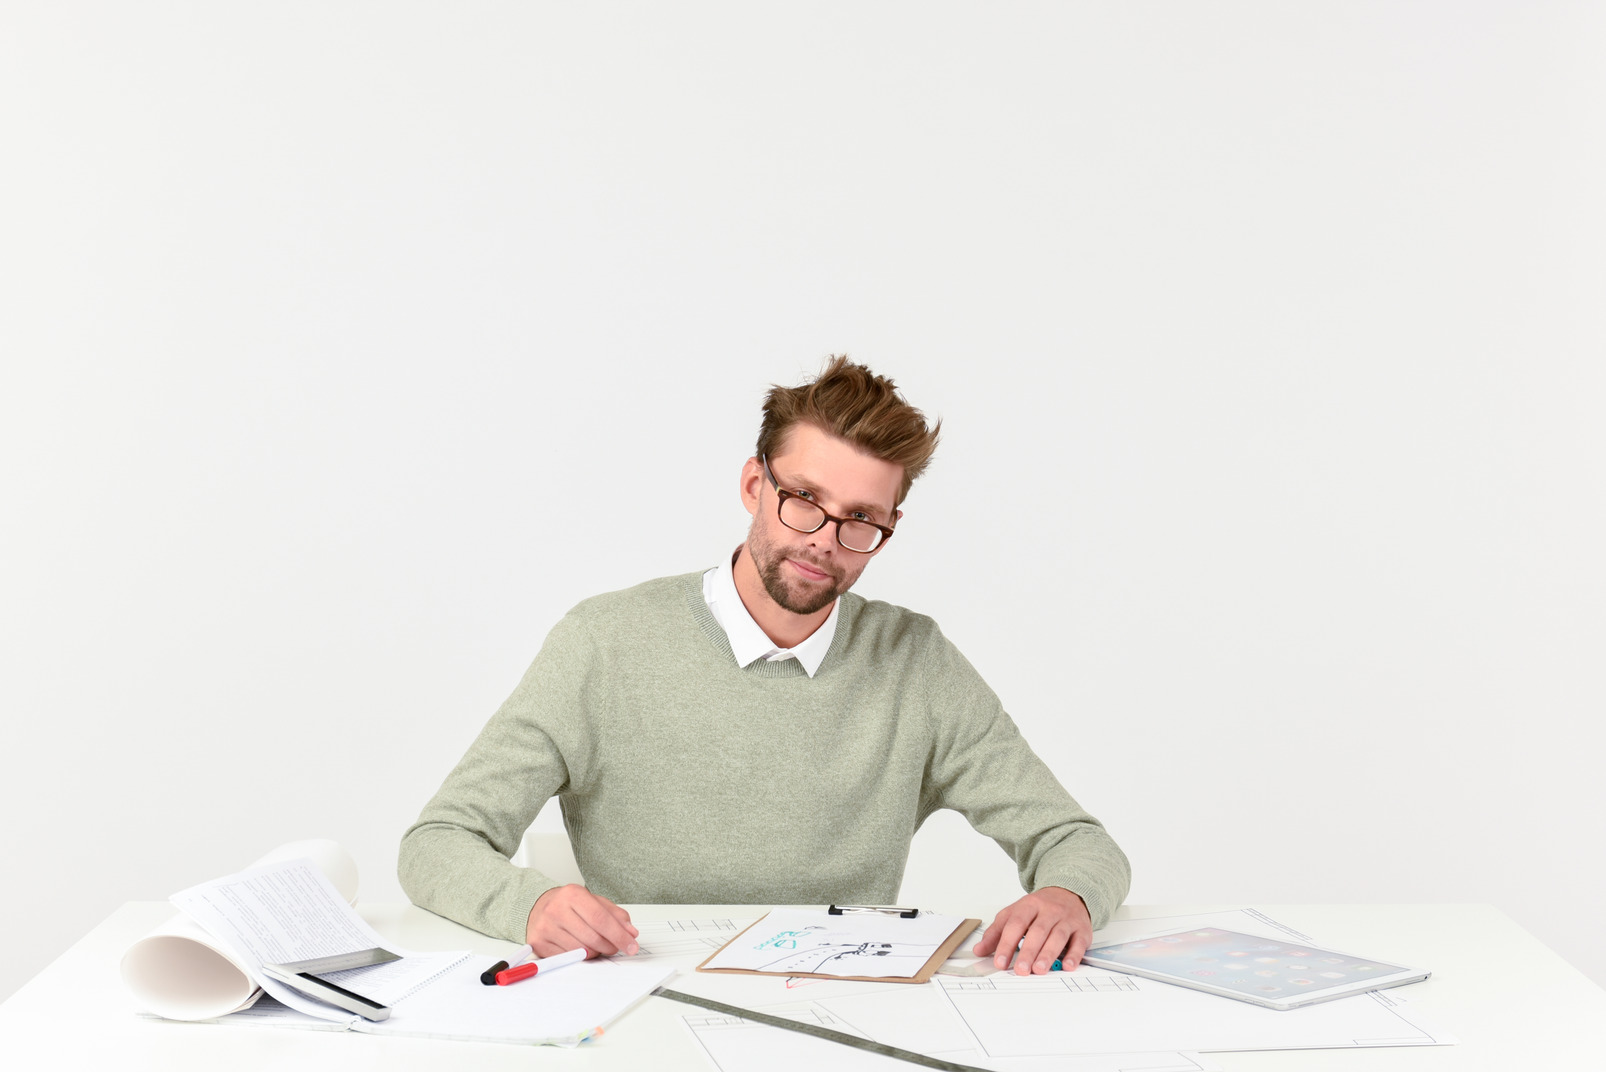 Wearing glasses male architect sitting at work desk